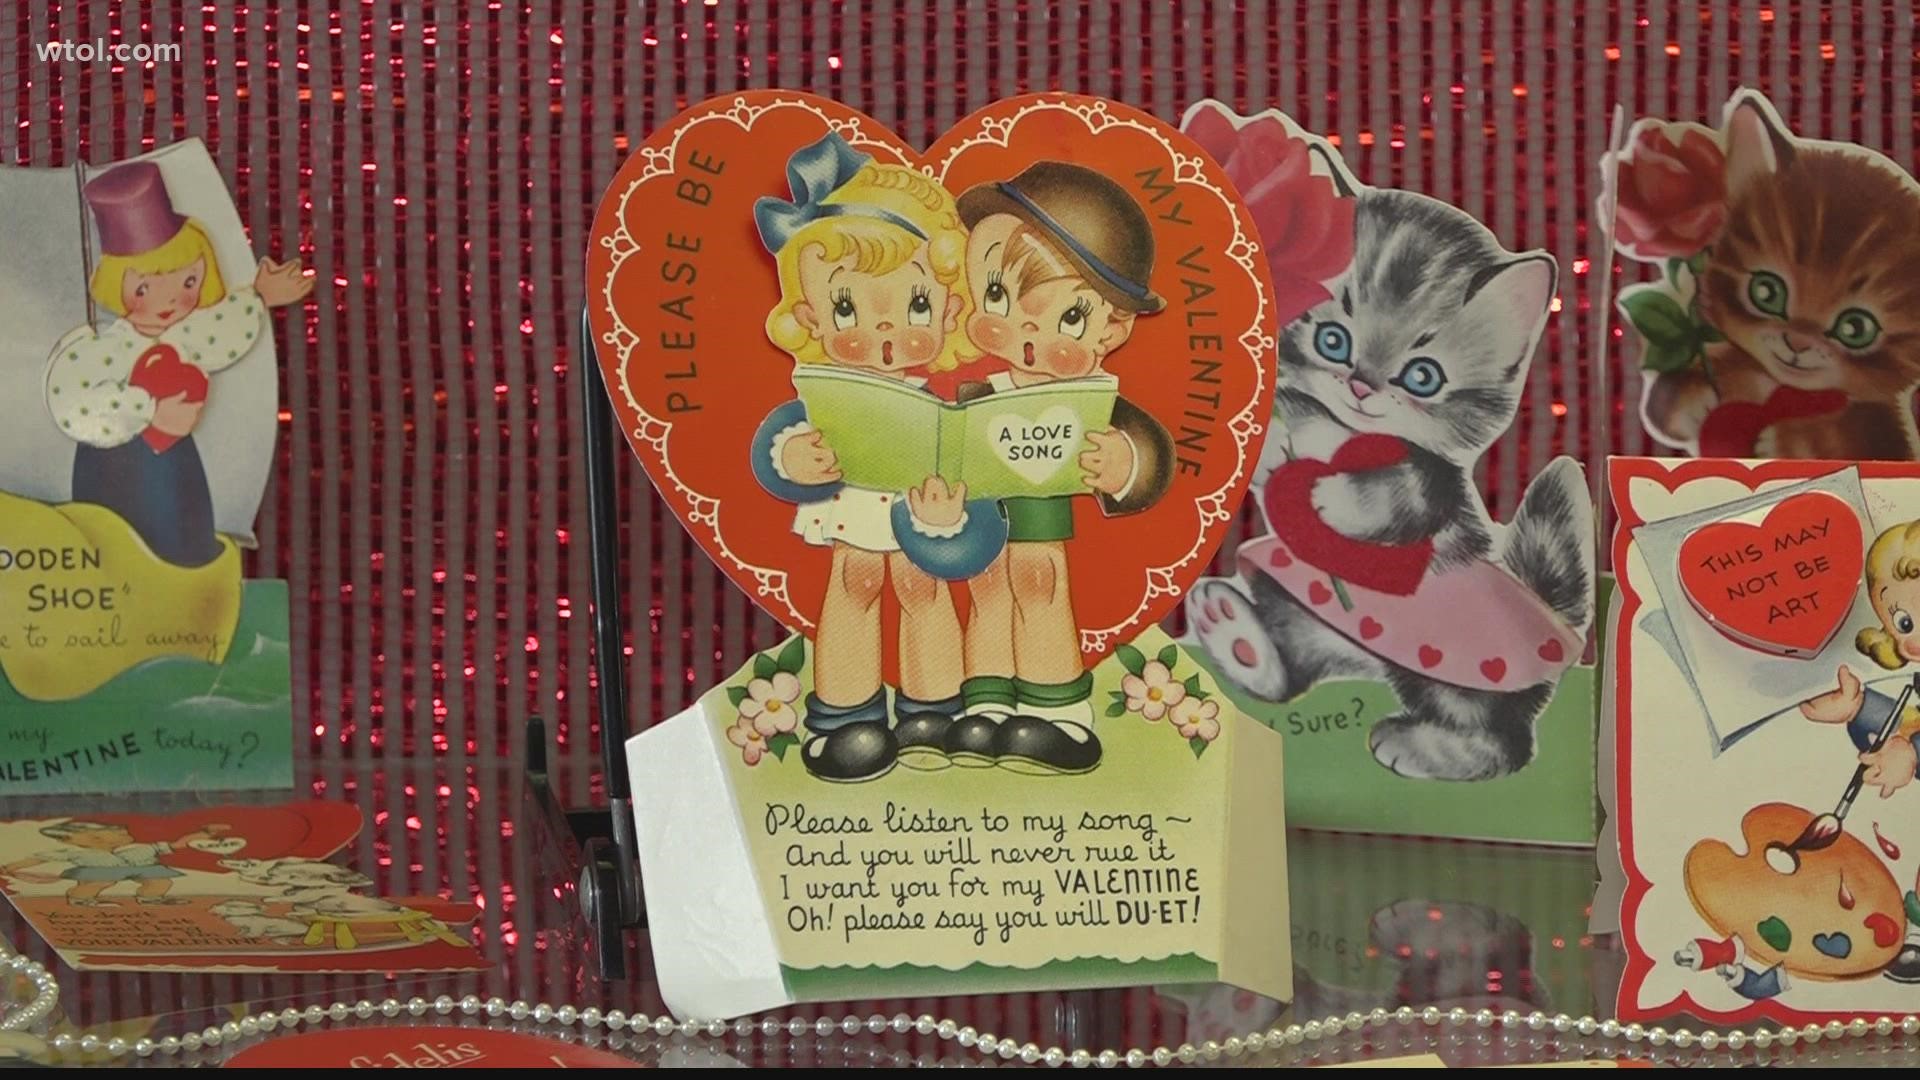 The cards belonged to Ralph Gerber, father of Kelly Foster of Bluffton, who collected them as a child in the 1940's